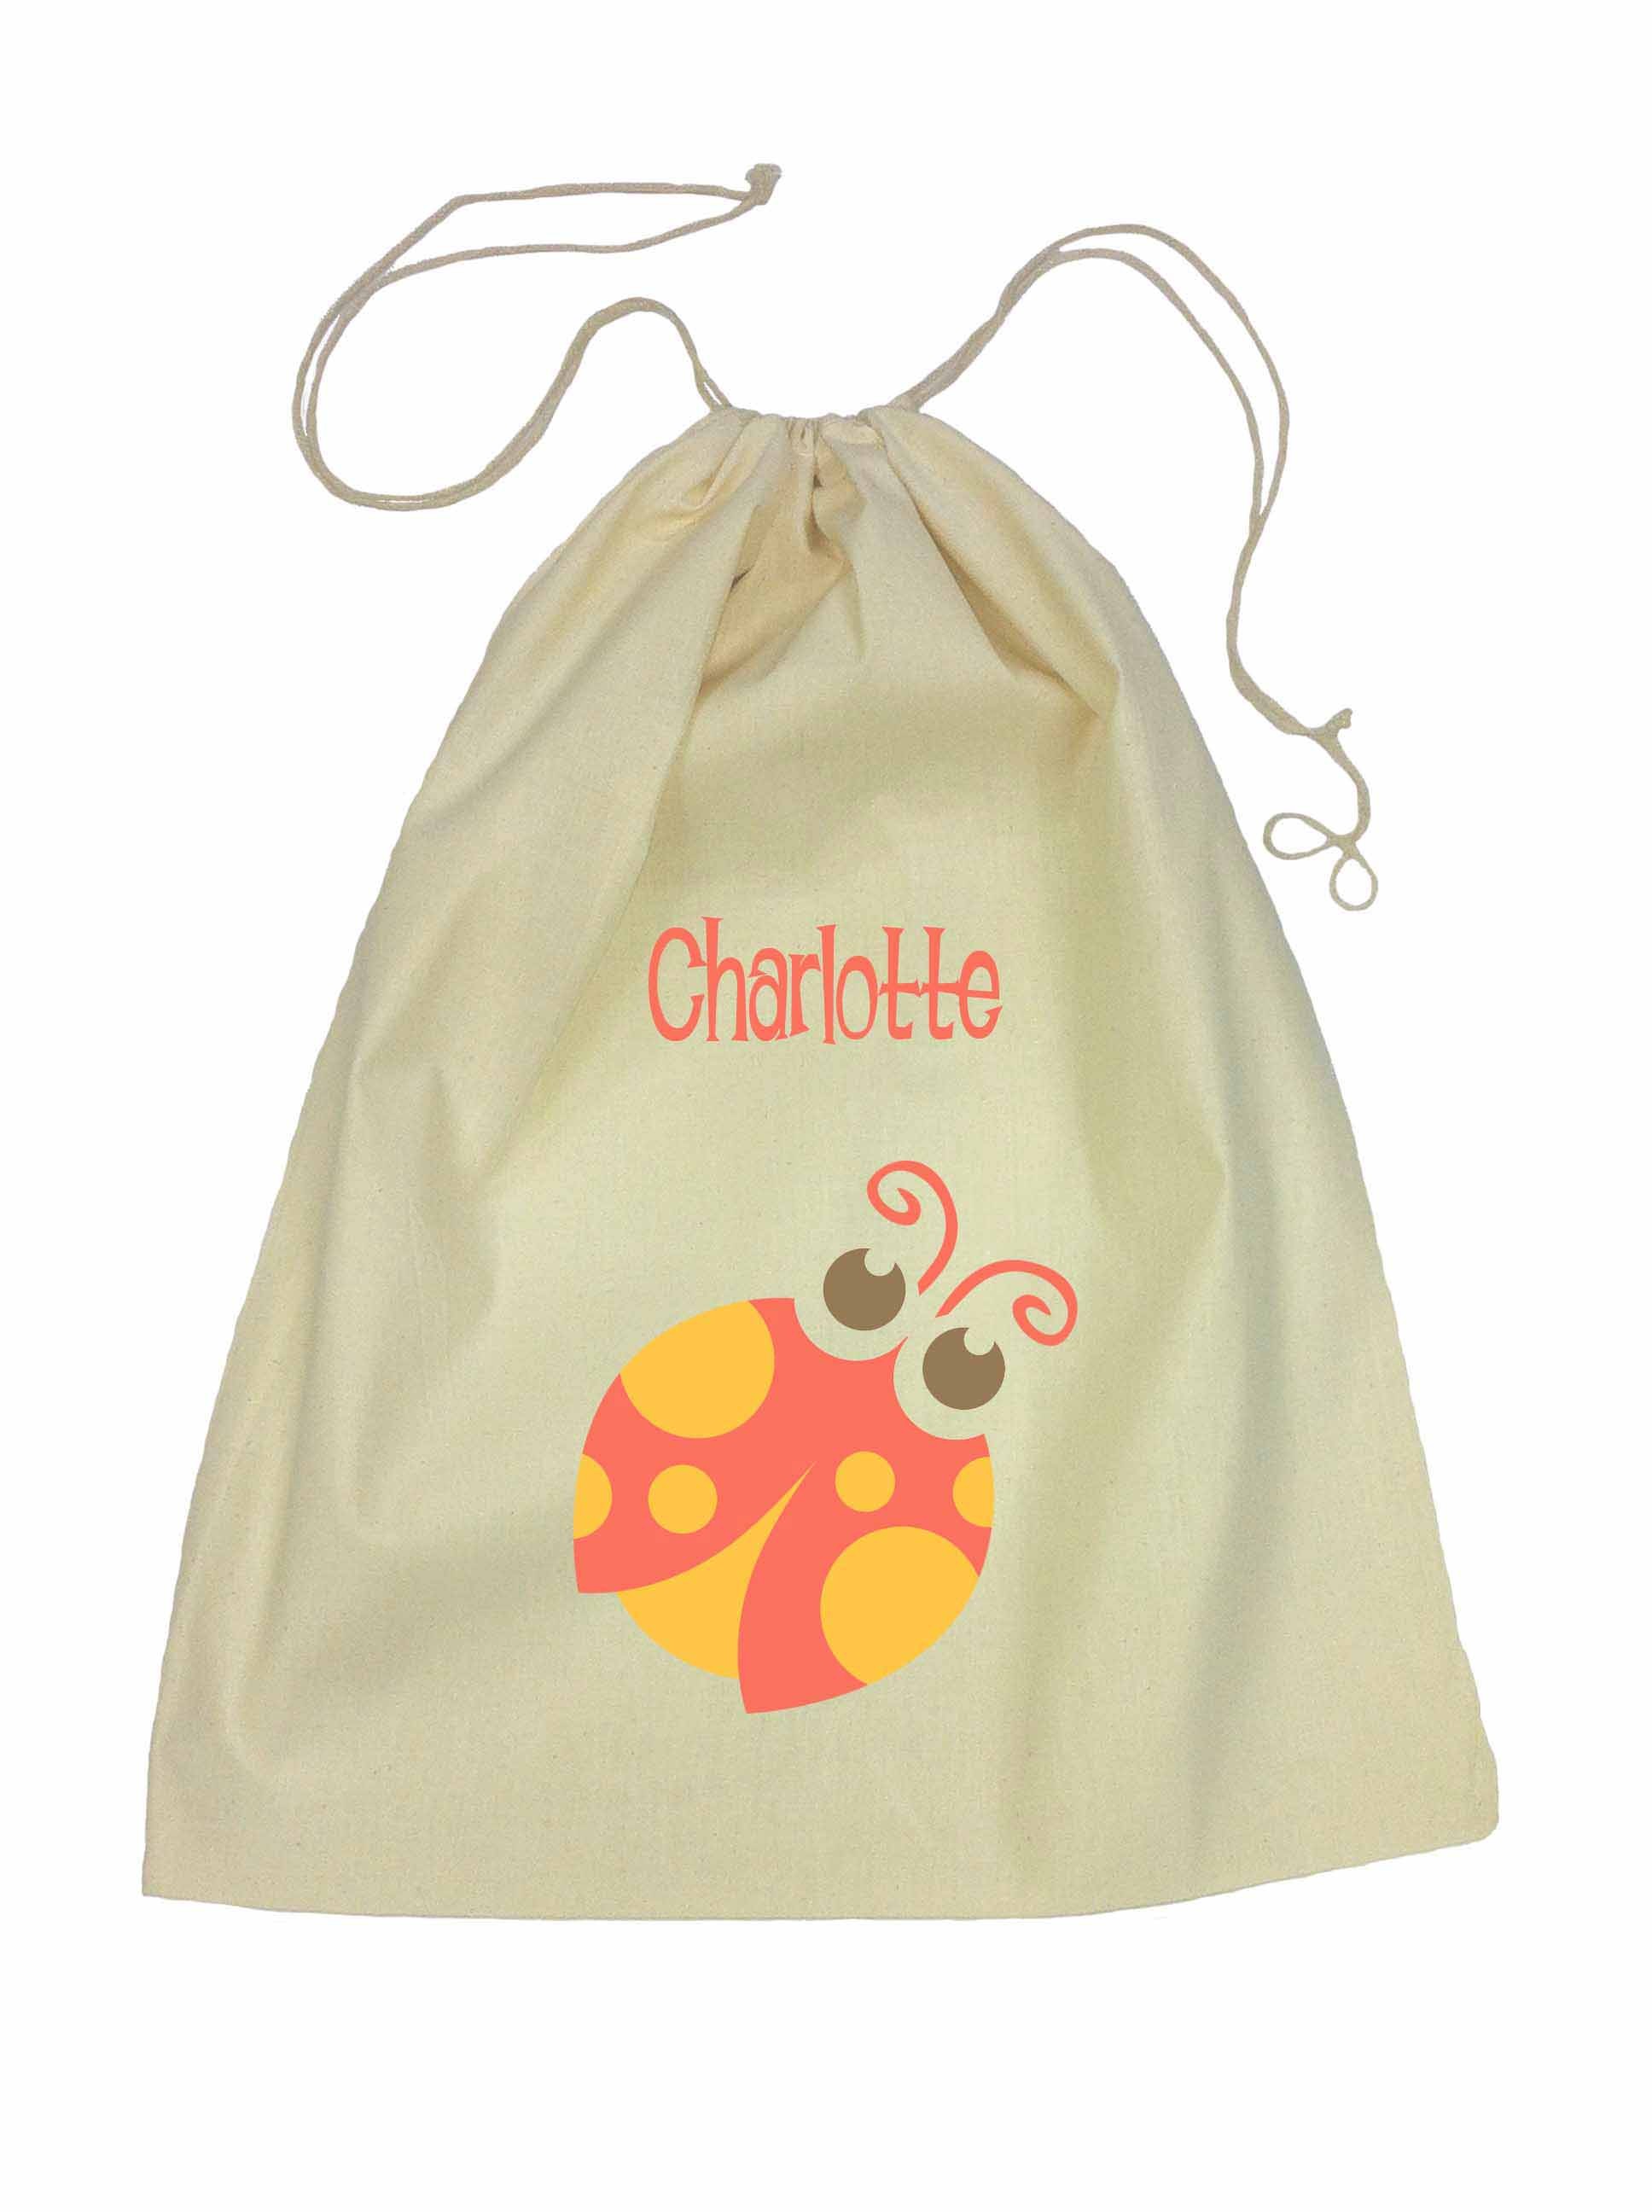 Drawstring Library Bag with Red Beetle